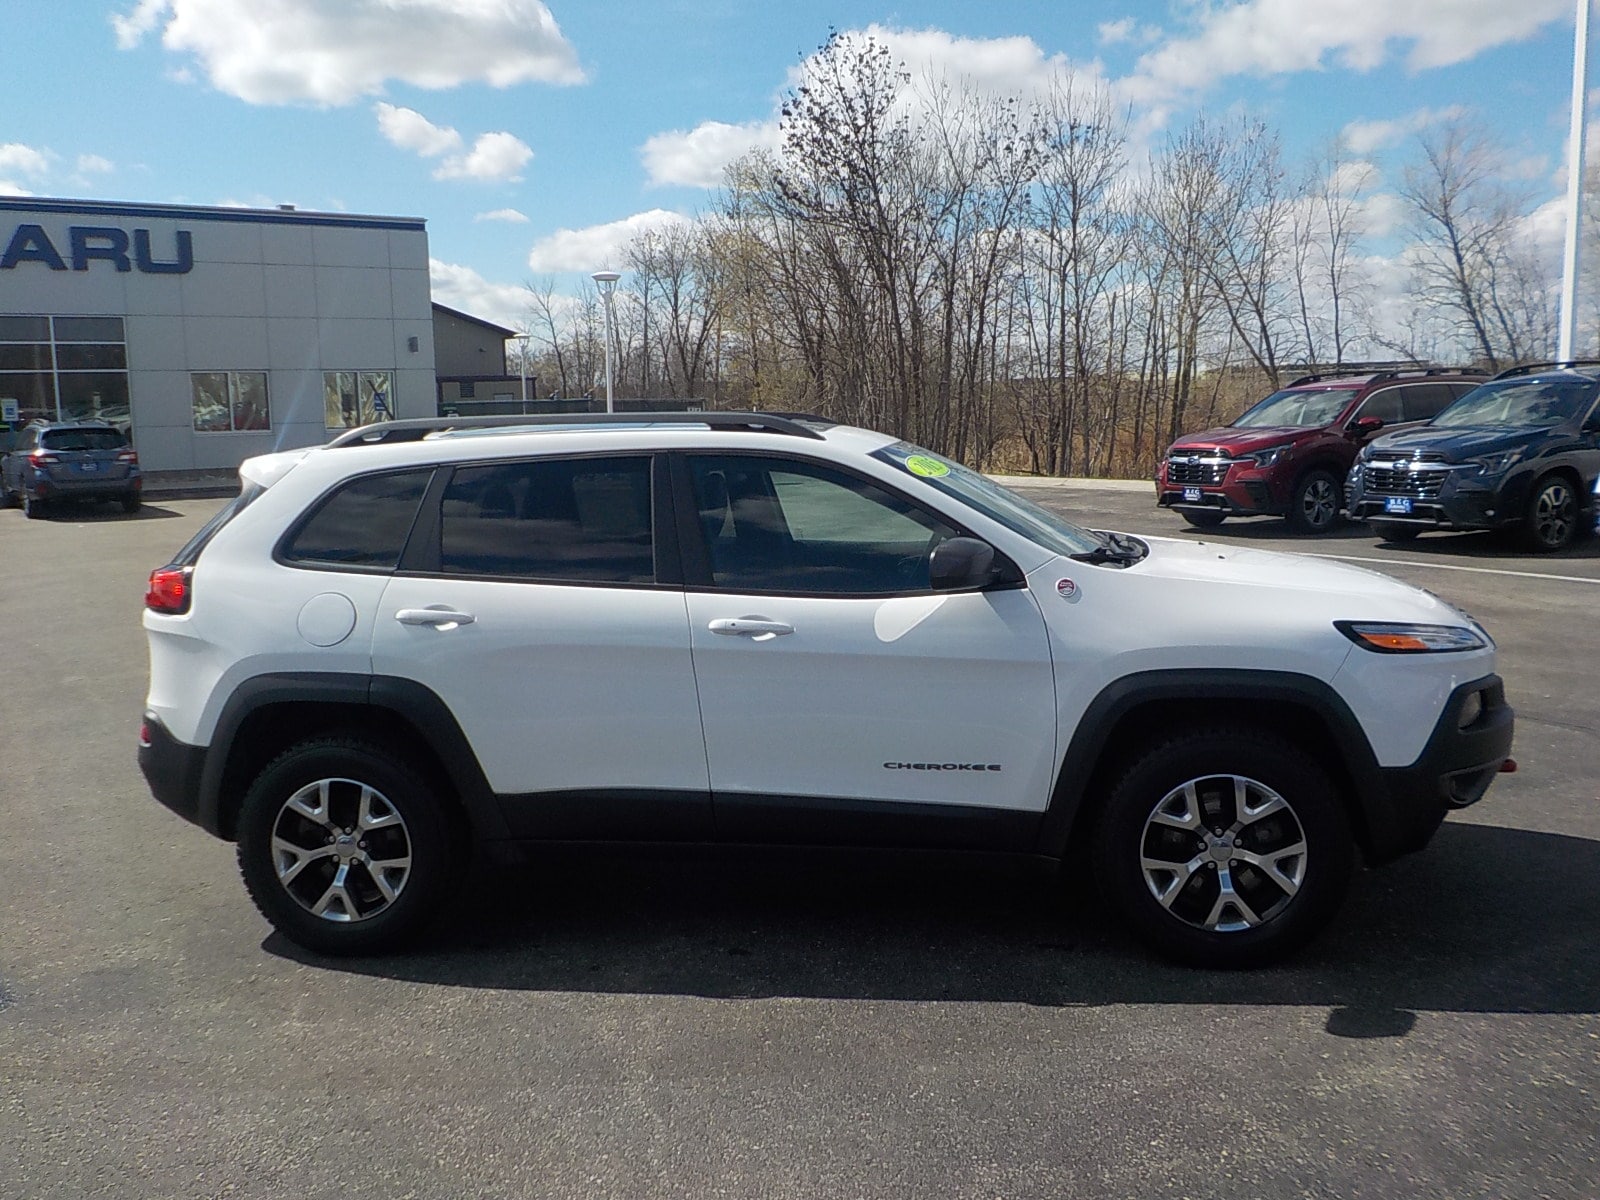 Used 2015 Jeep Cherokee Trailhawk with VIN 1C4PJMBS2FW520806 for sale in Detroit Lakes, Minnesota